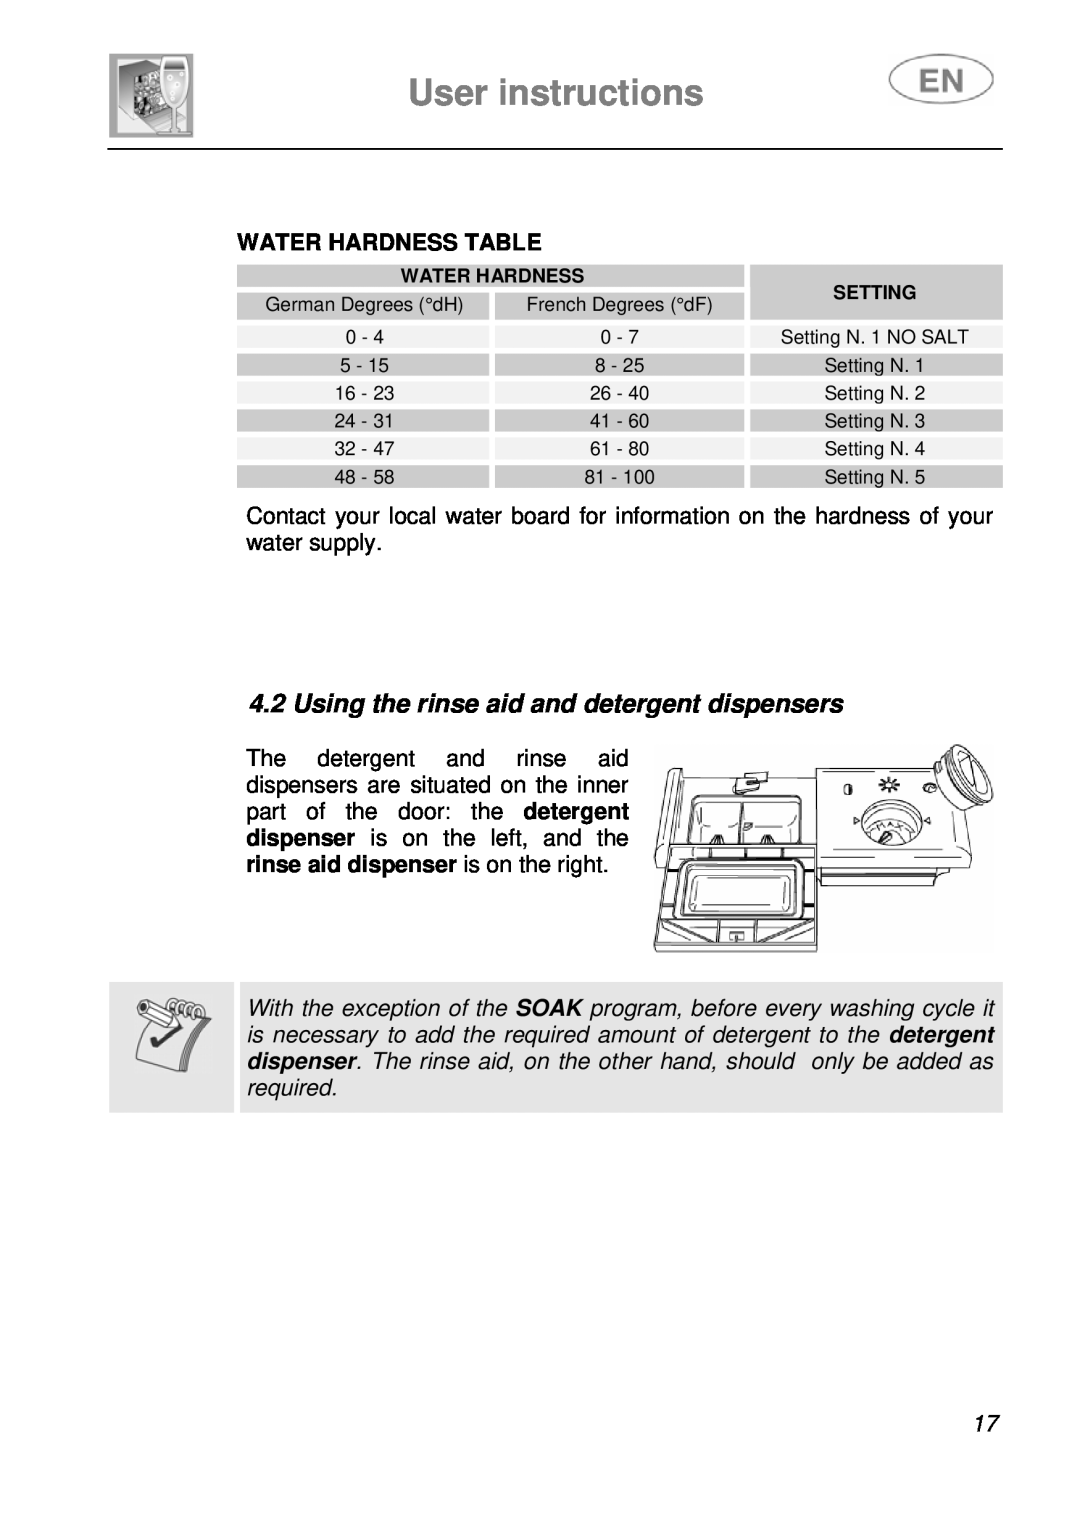 Smeg STA6245, STA6246 User instructions, Using the rinse aid and detergent dispensers, Water Hardness Table 